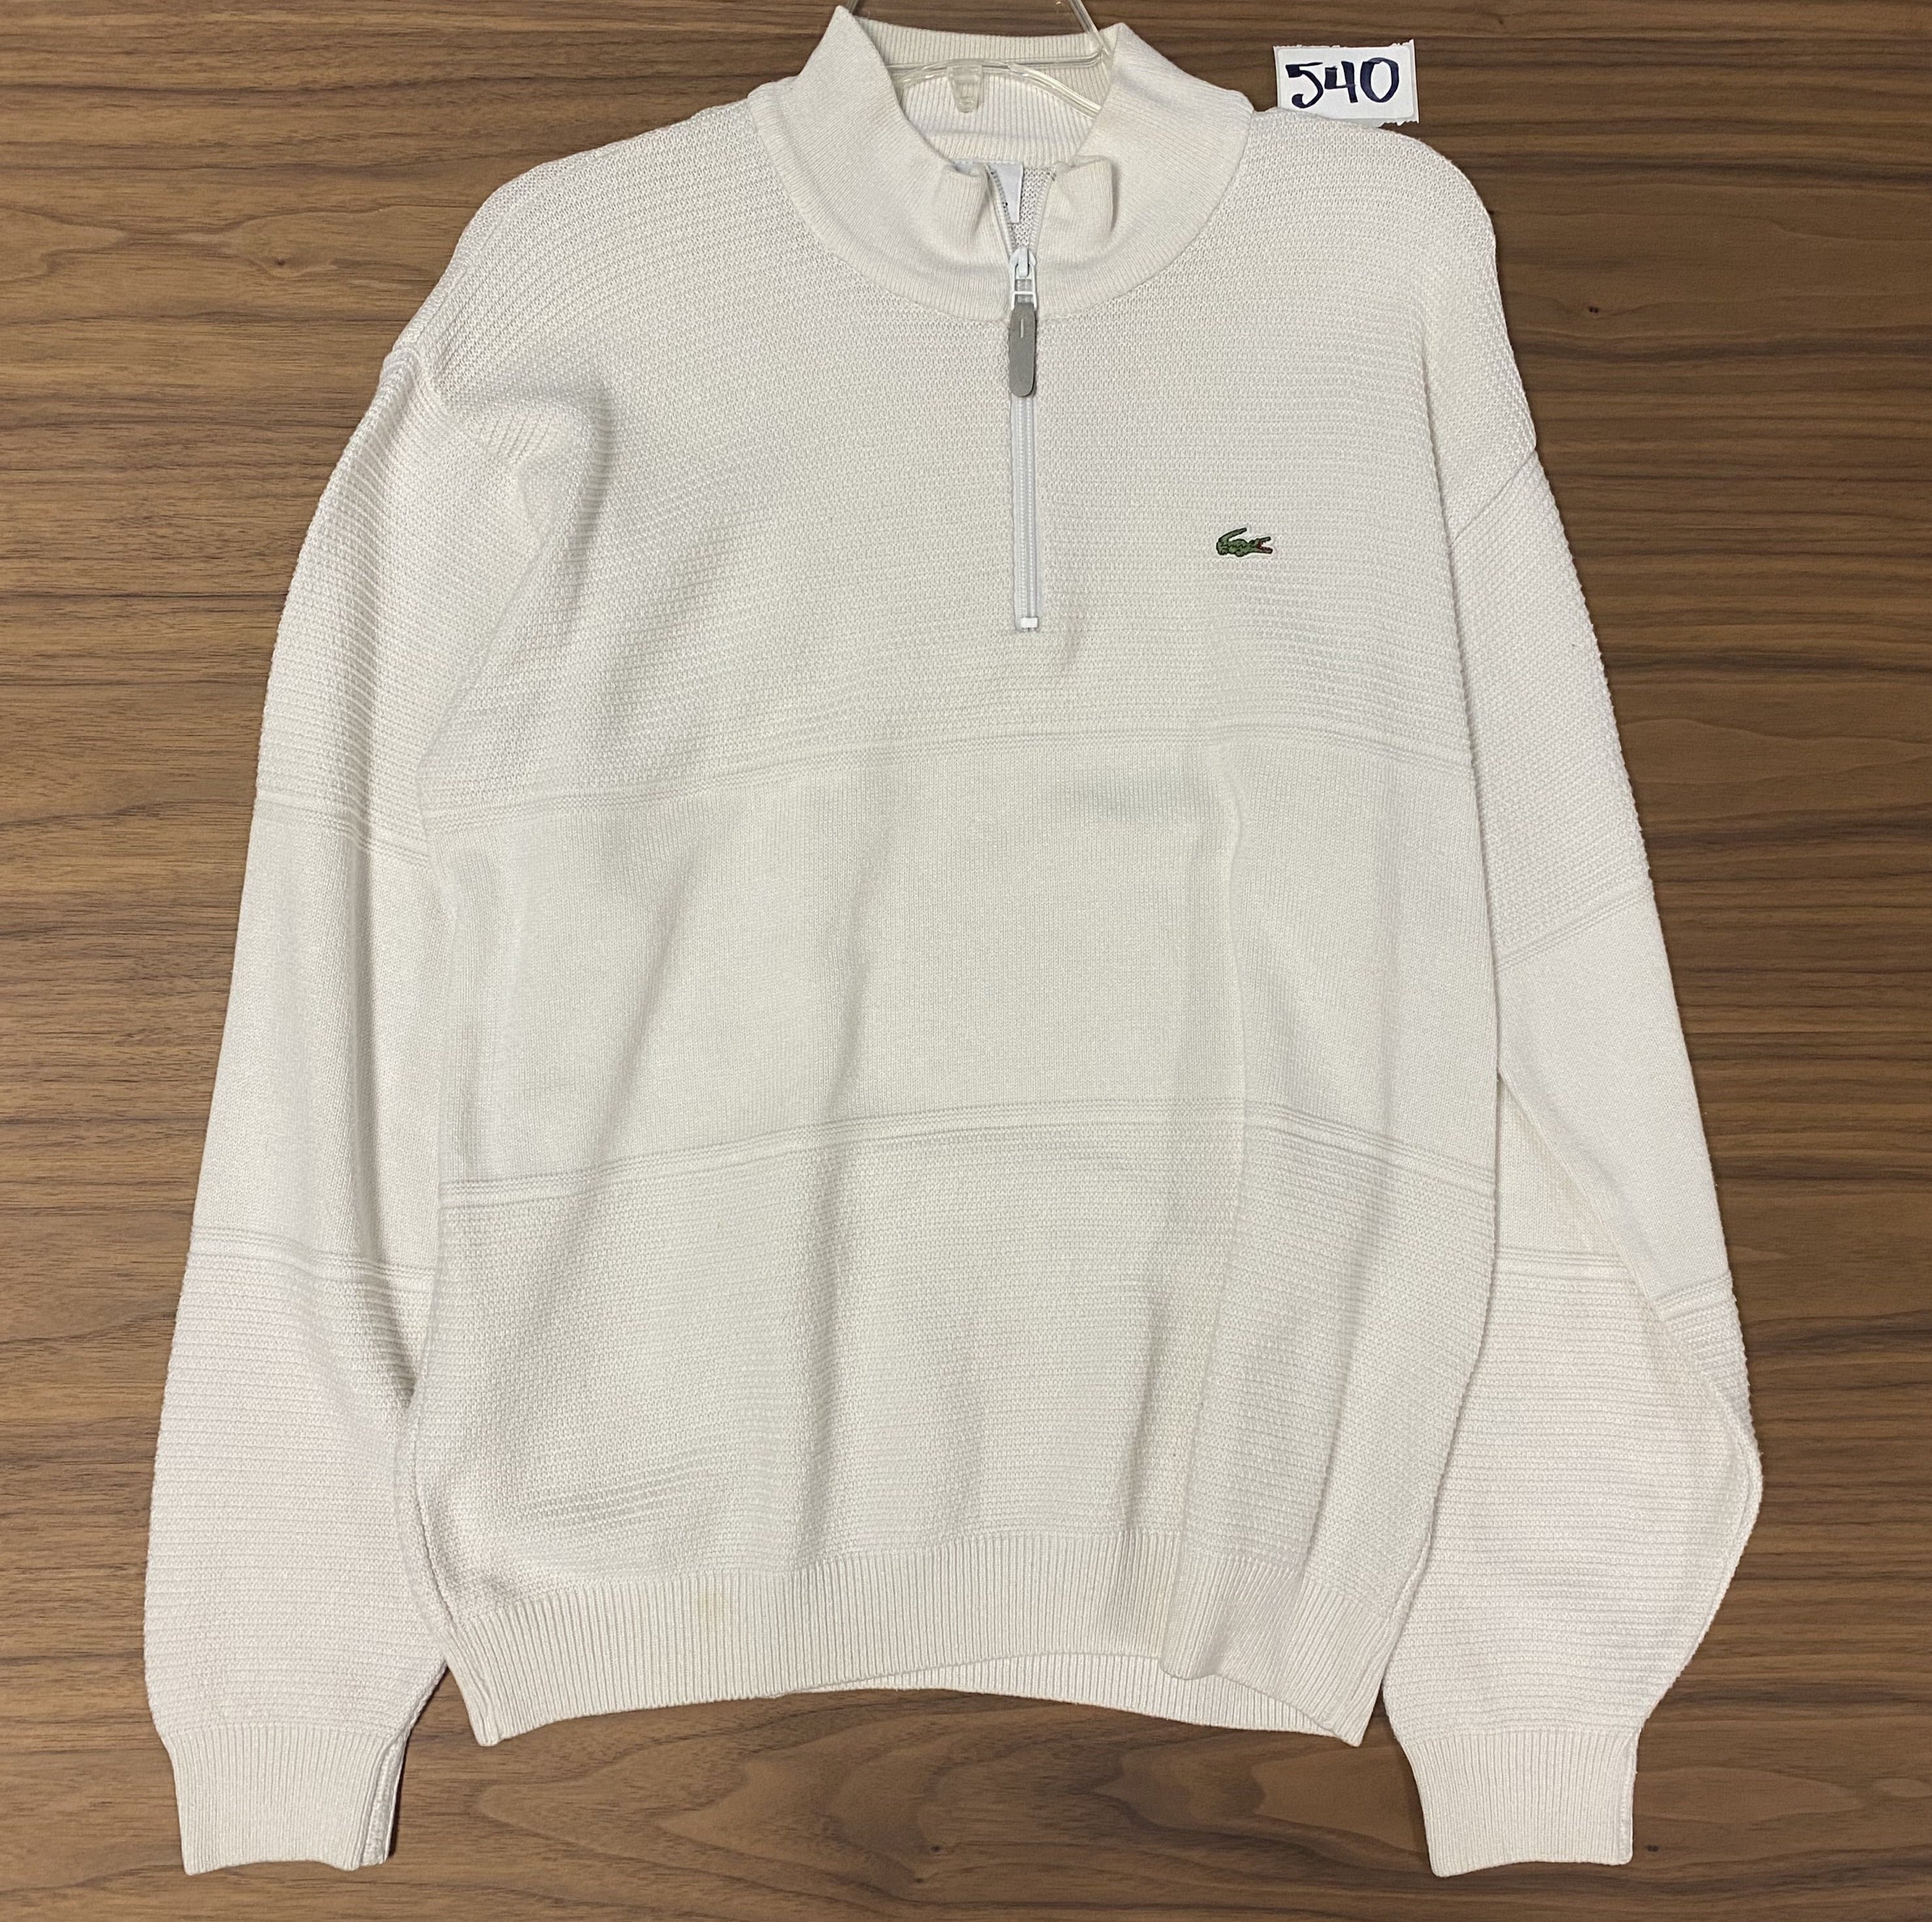 Lacoste Zip Up knit Sweater - White